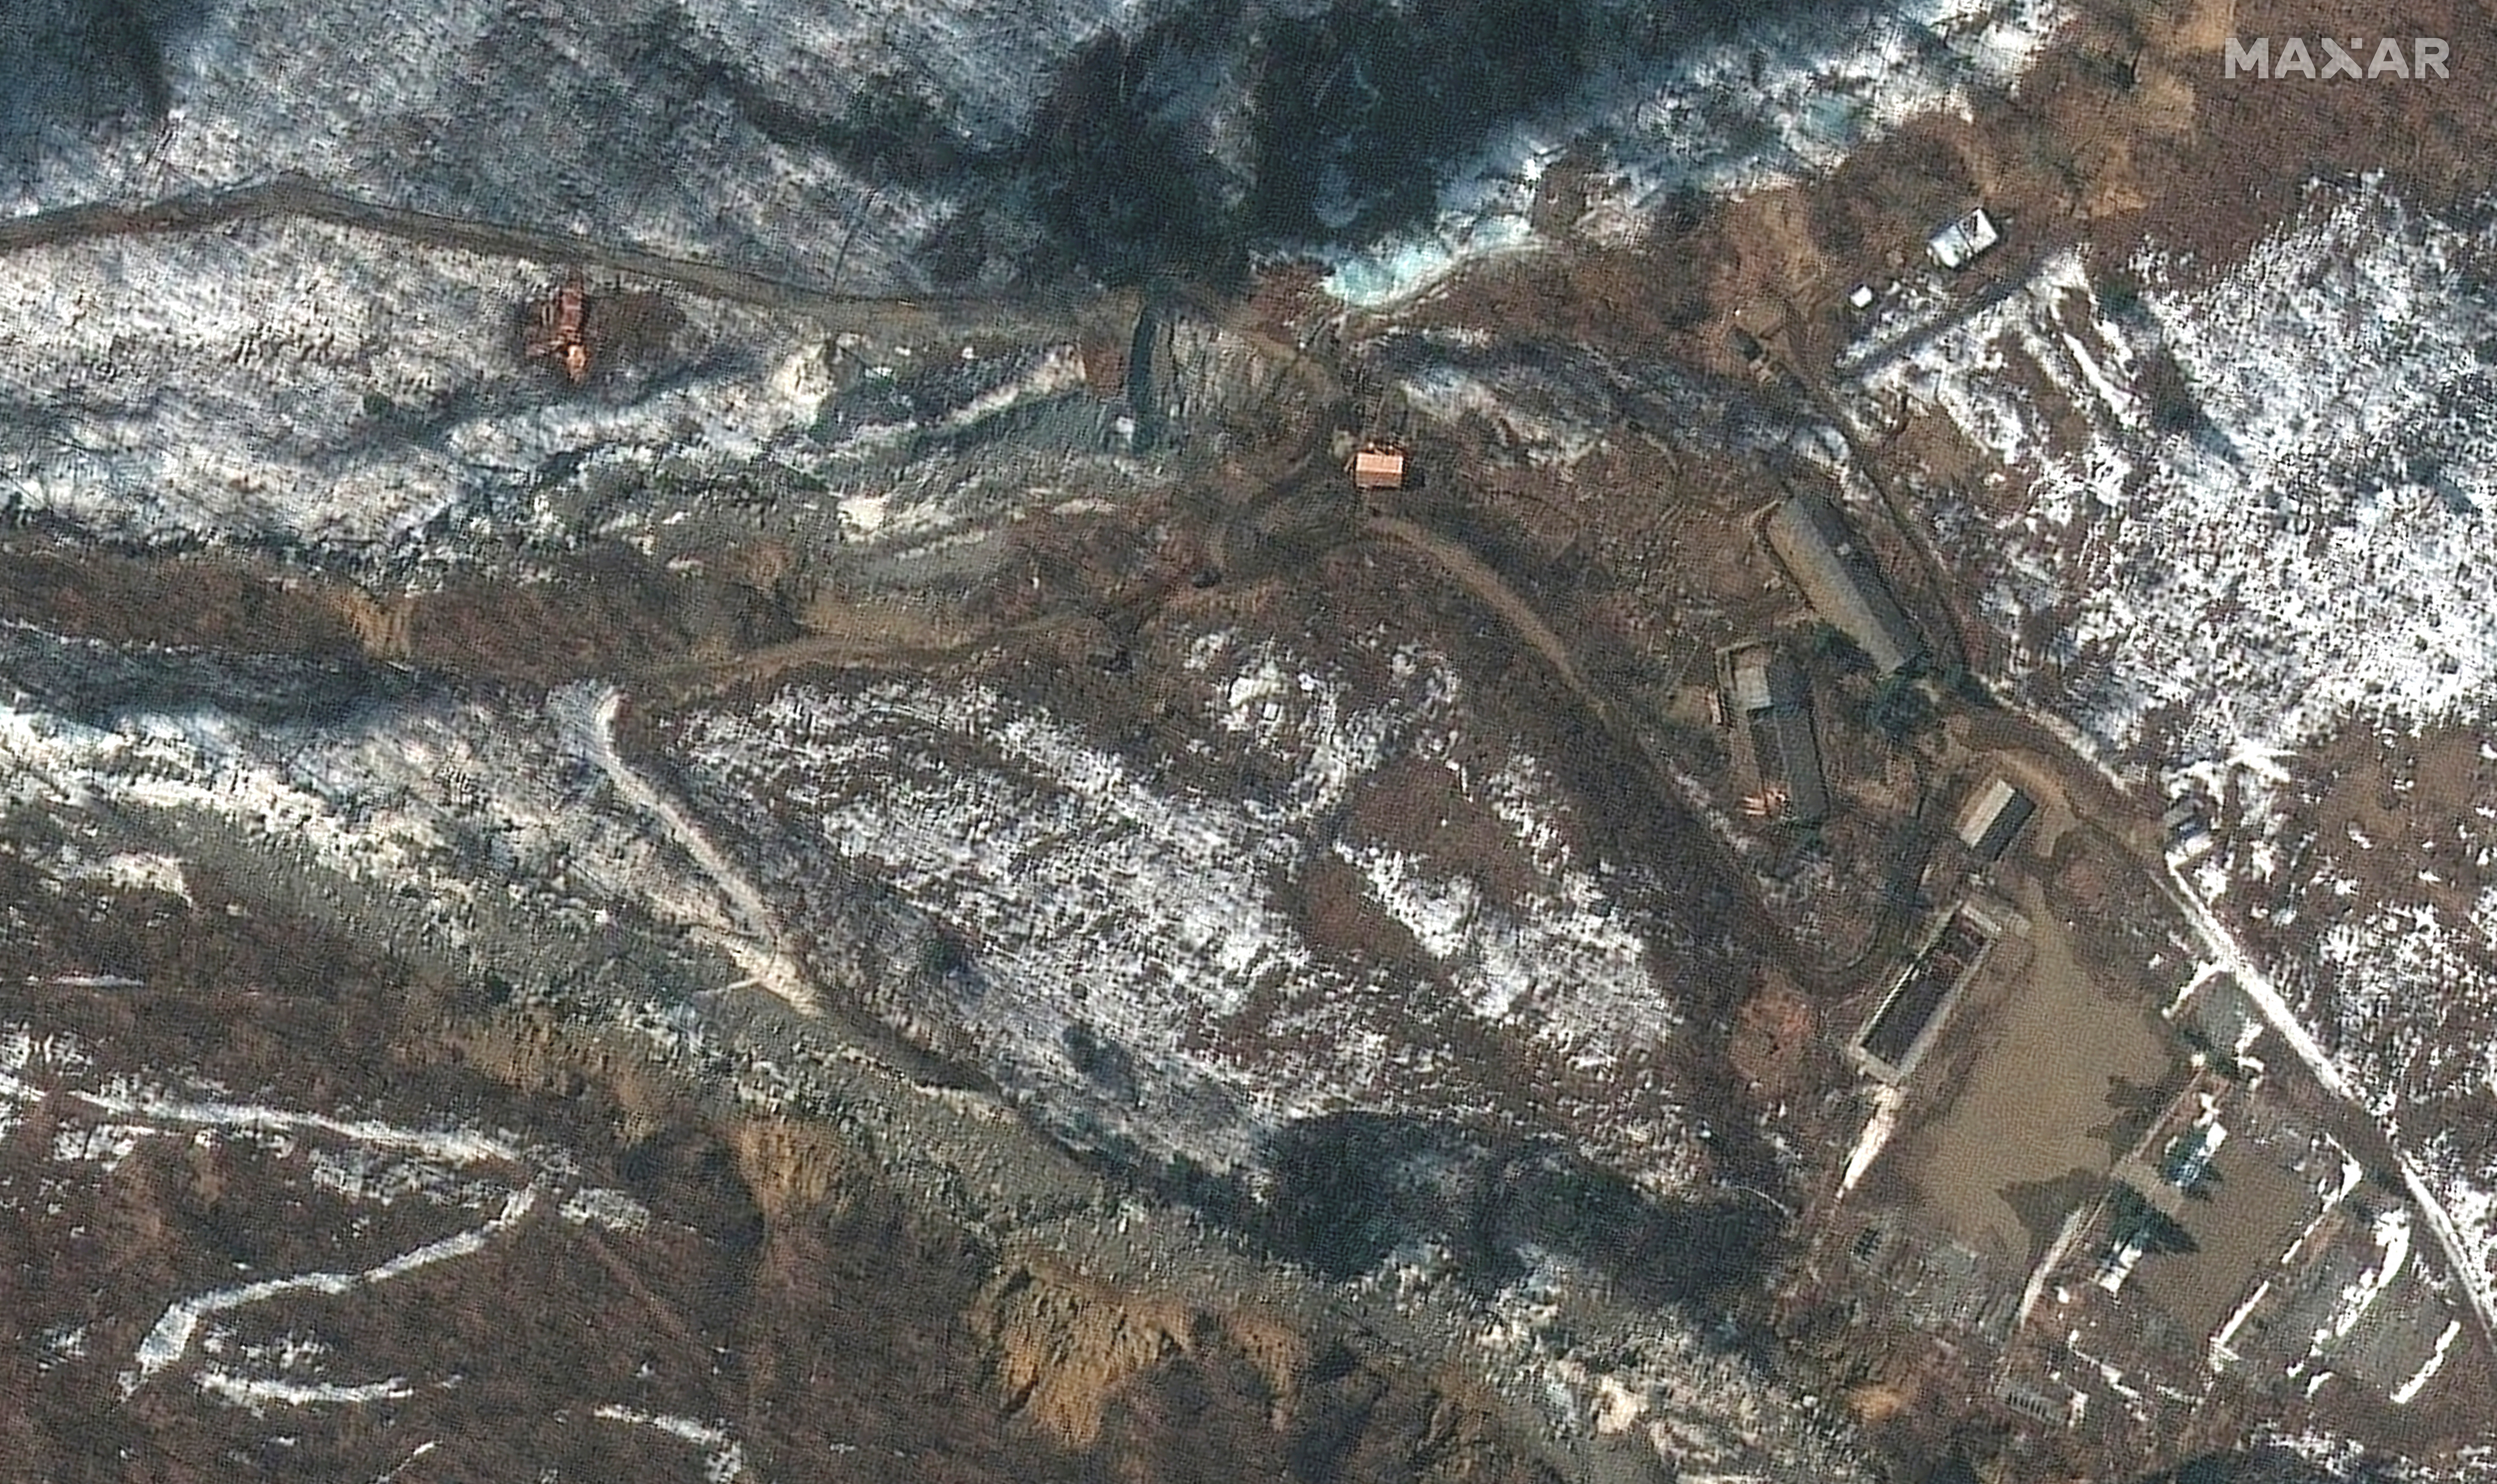 A satellite image shows an overview of new activity at the Punggye-ri nuclear test site, Kilju County